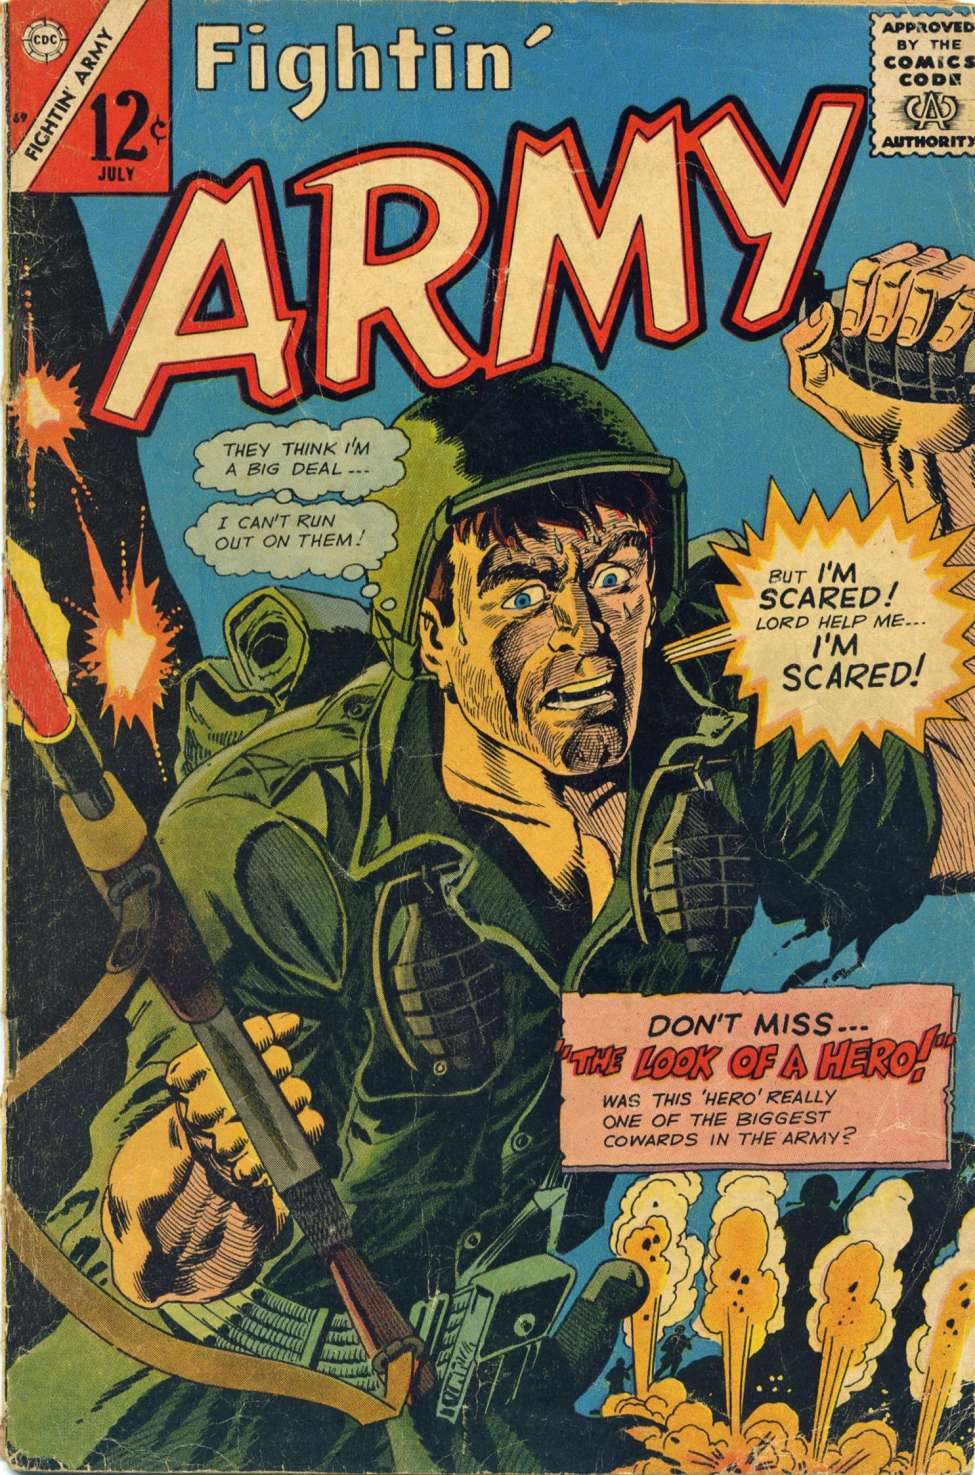 Book Cover For Fightin' Army 69